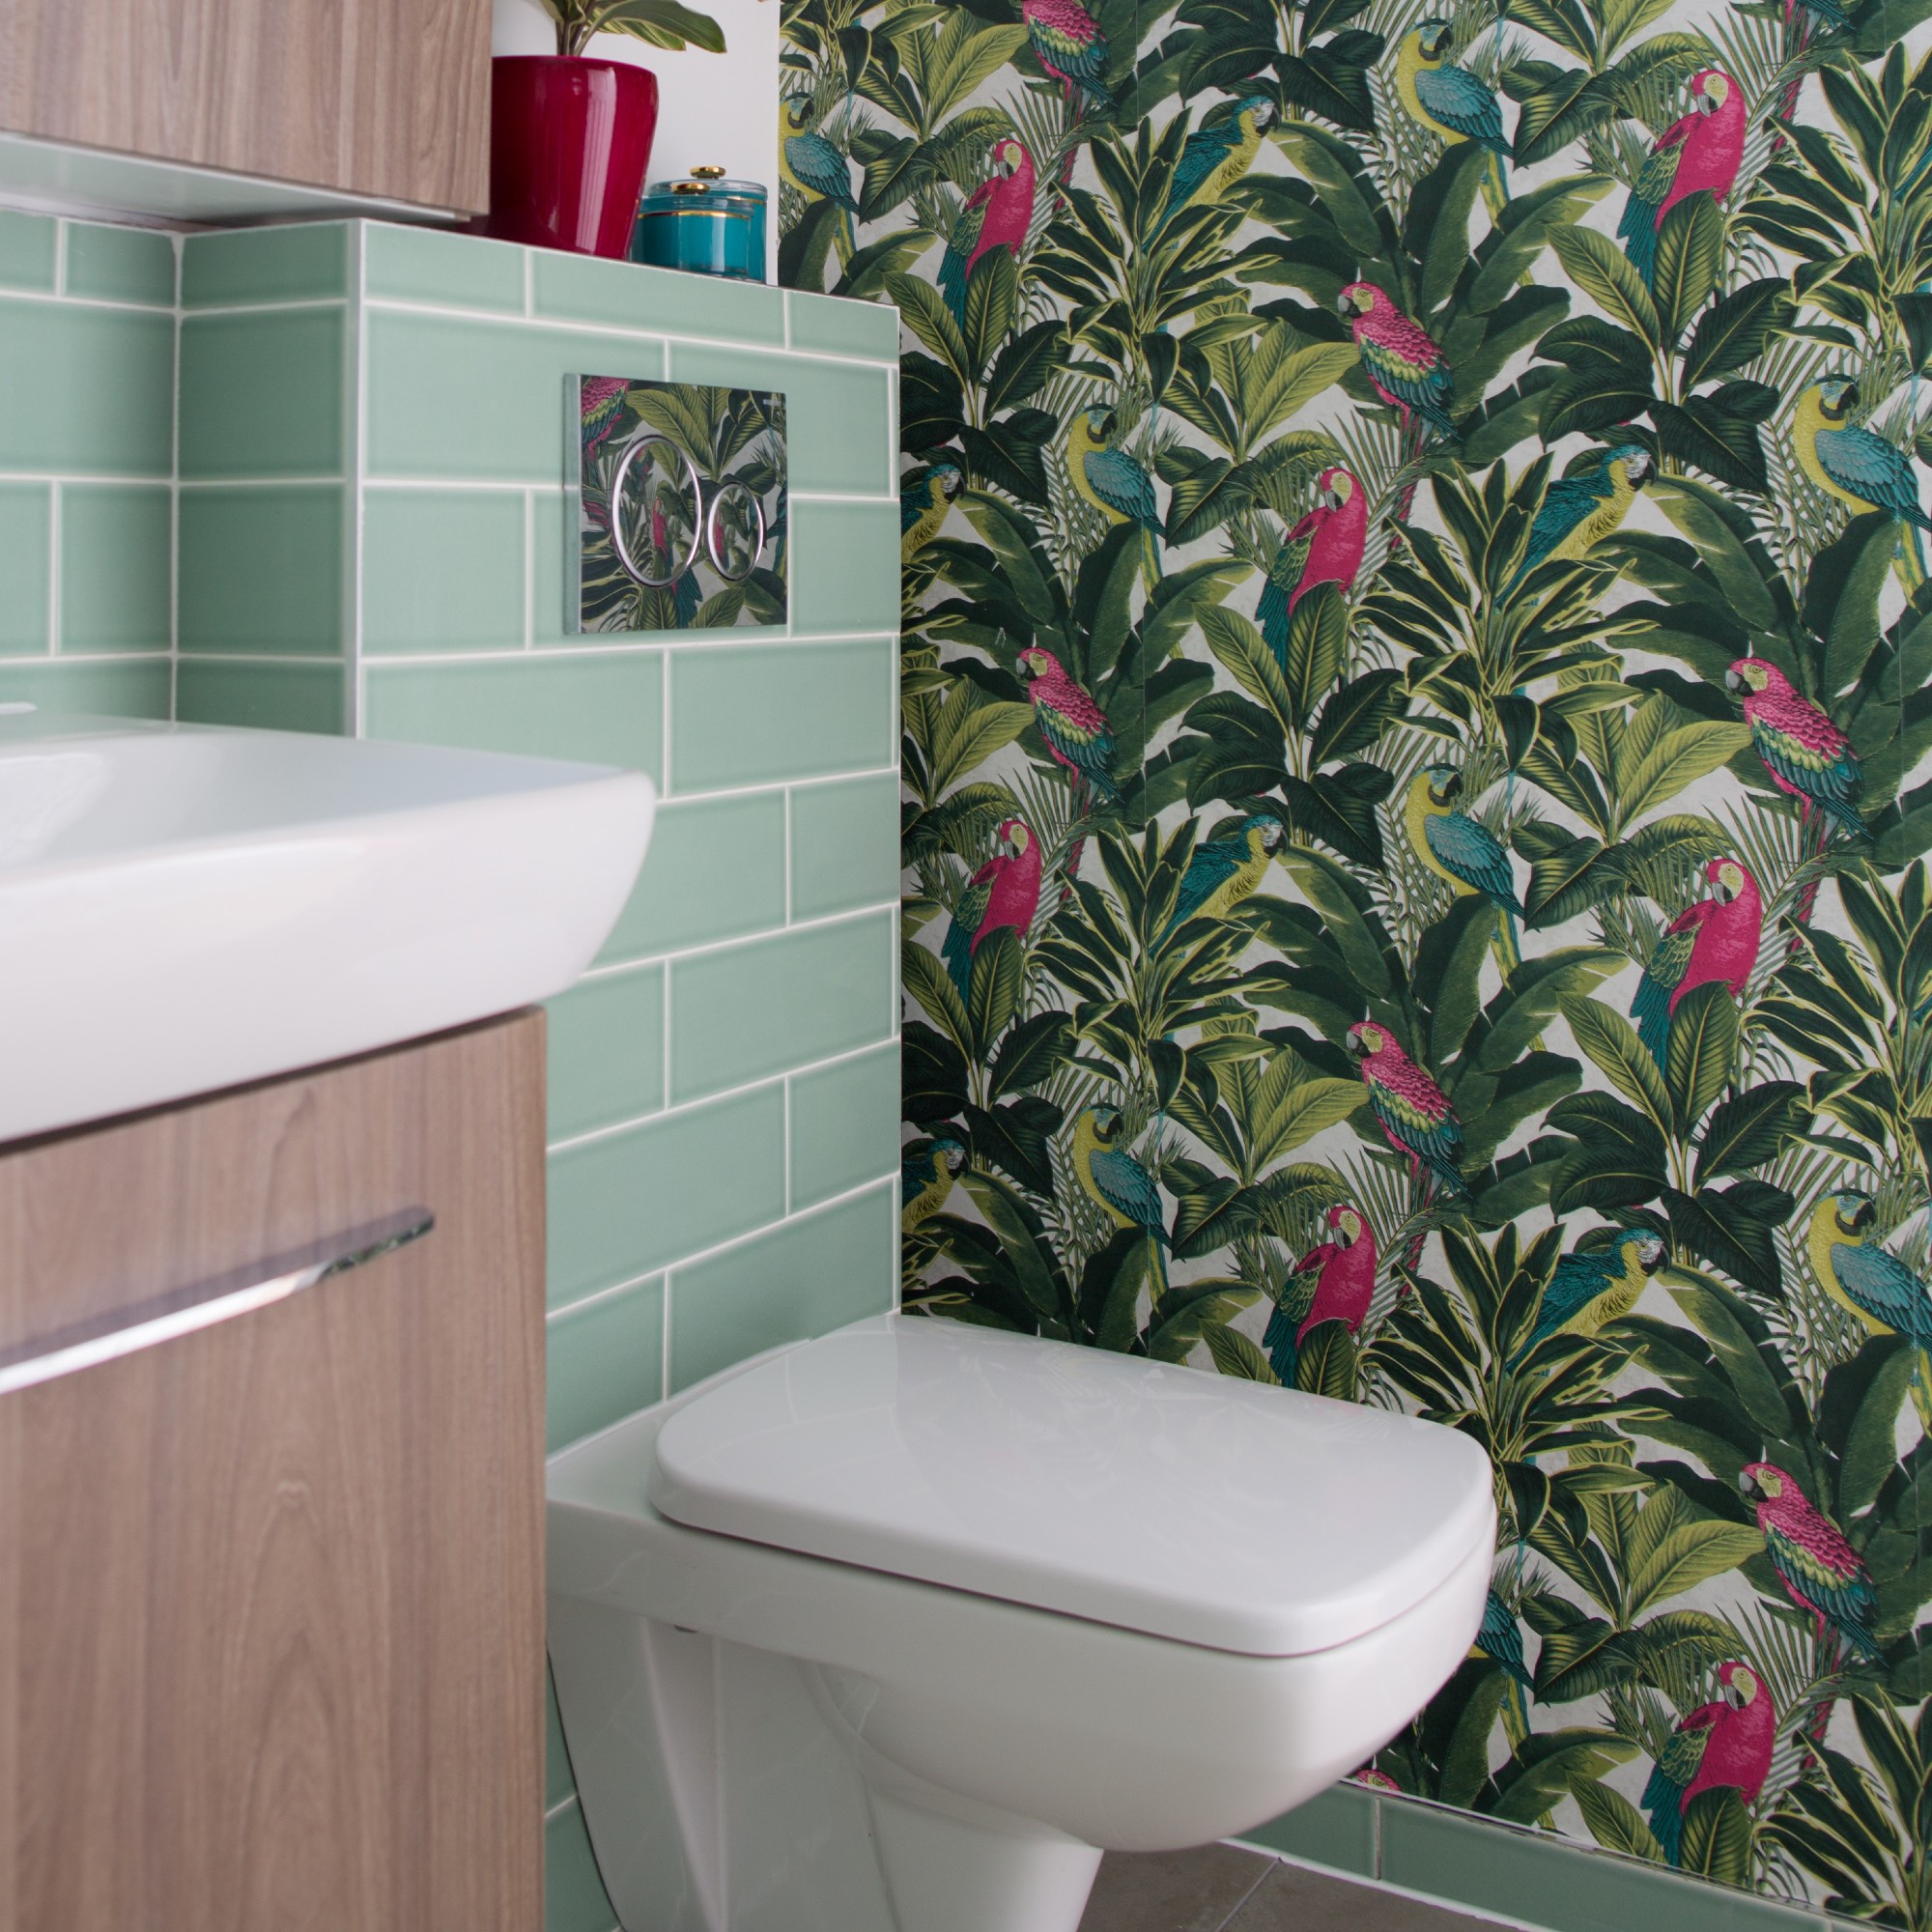 A cloakroom with a tropical wallpaper